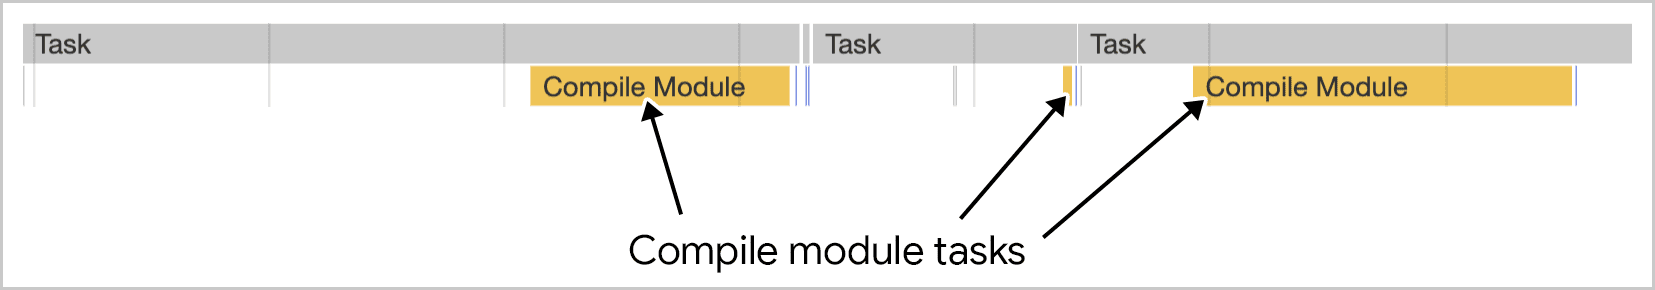 Module compilation work in multiple tasks as visualized in Chrome DevTools.